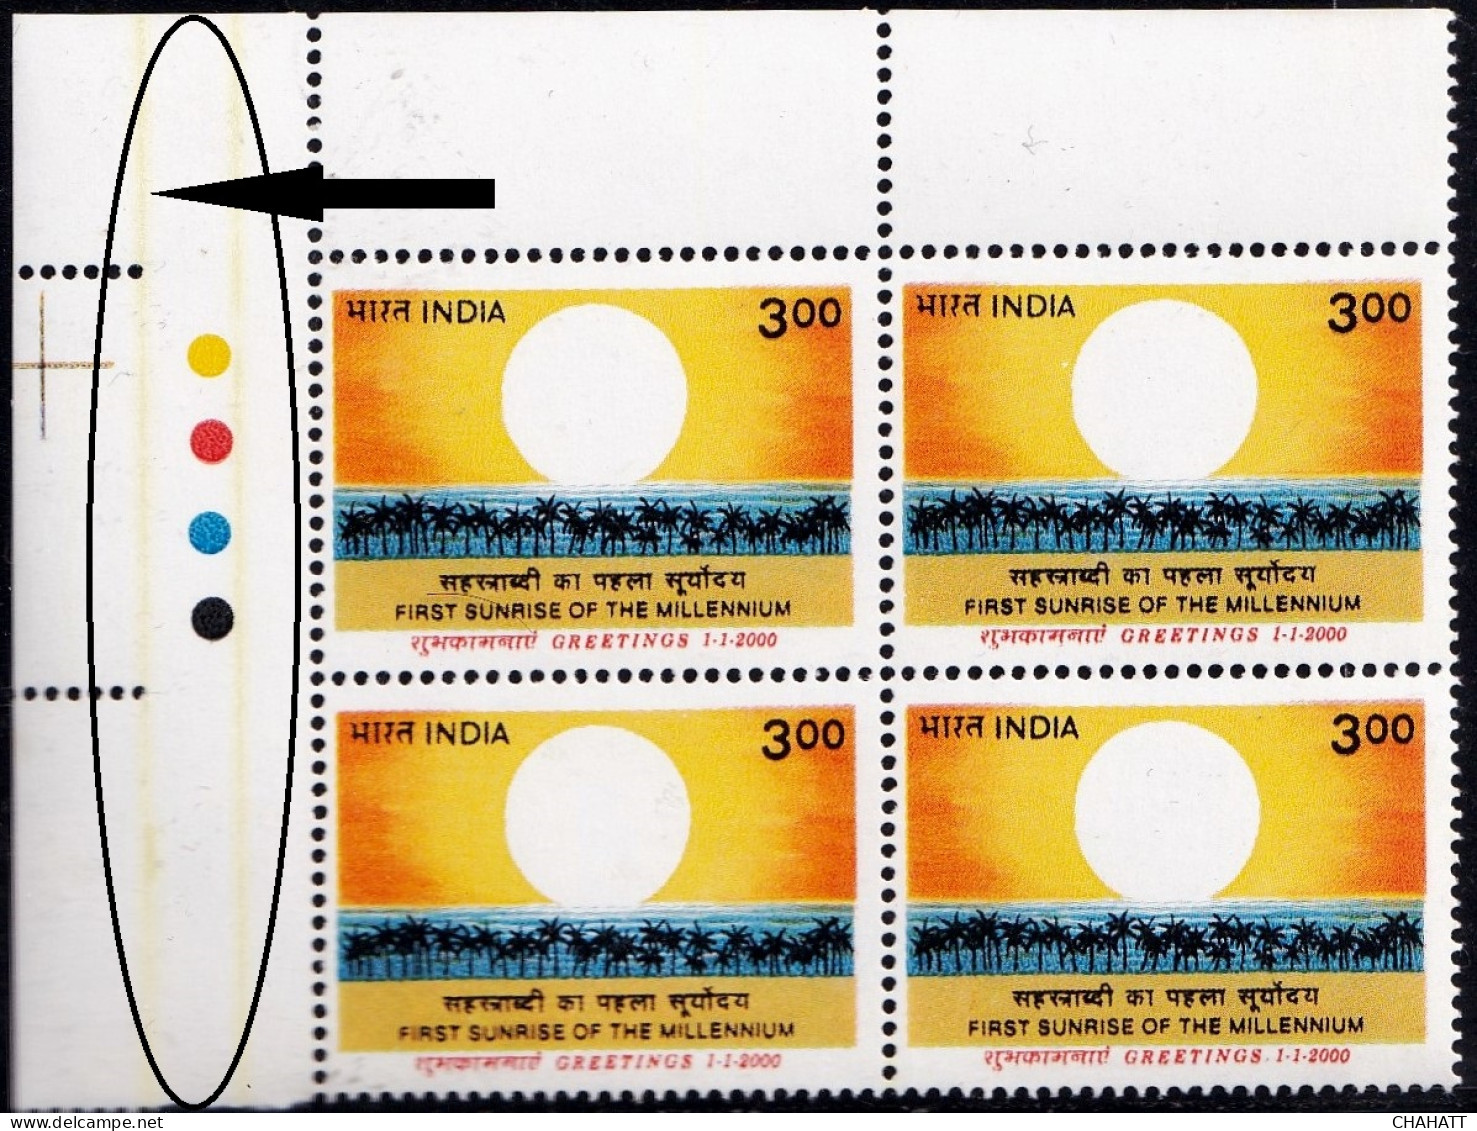 GREETINGS FOR THE MILLENNIUM-RISING SUN-ERROR- BLOCK OF 4-TWO VERTICAL YELLOW BARS ON LEFT MARGIN-INDIA-2000-MNH-PA12-79 - Errors, Freaks & Oddities (EFO)